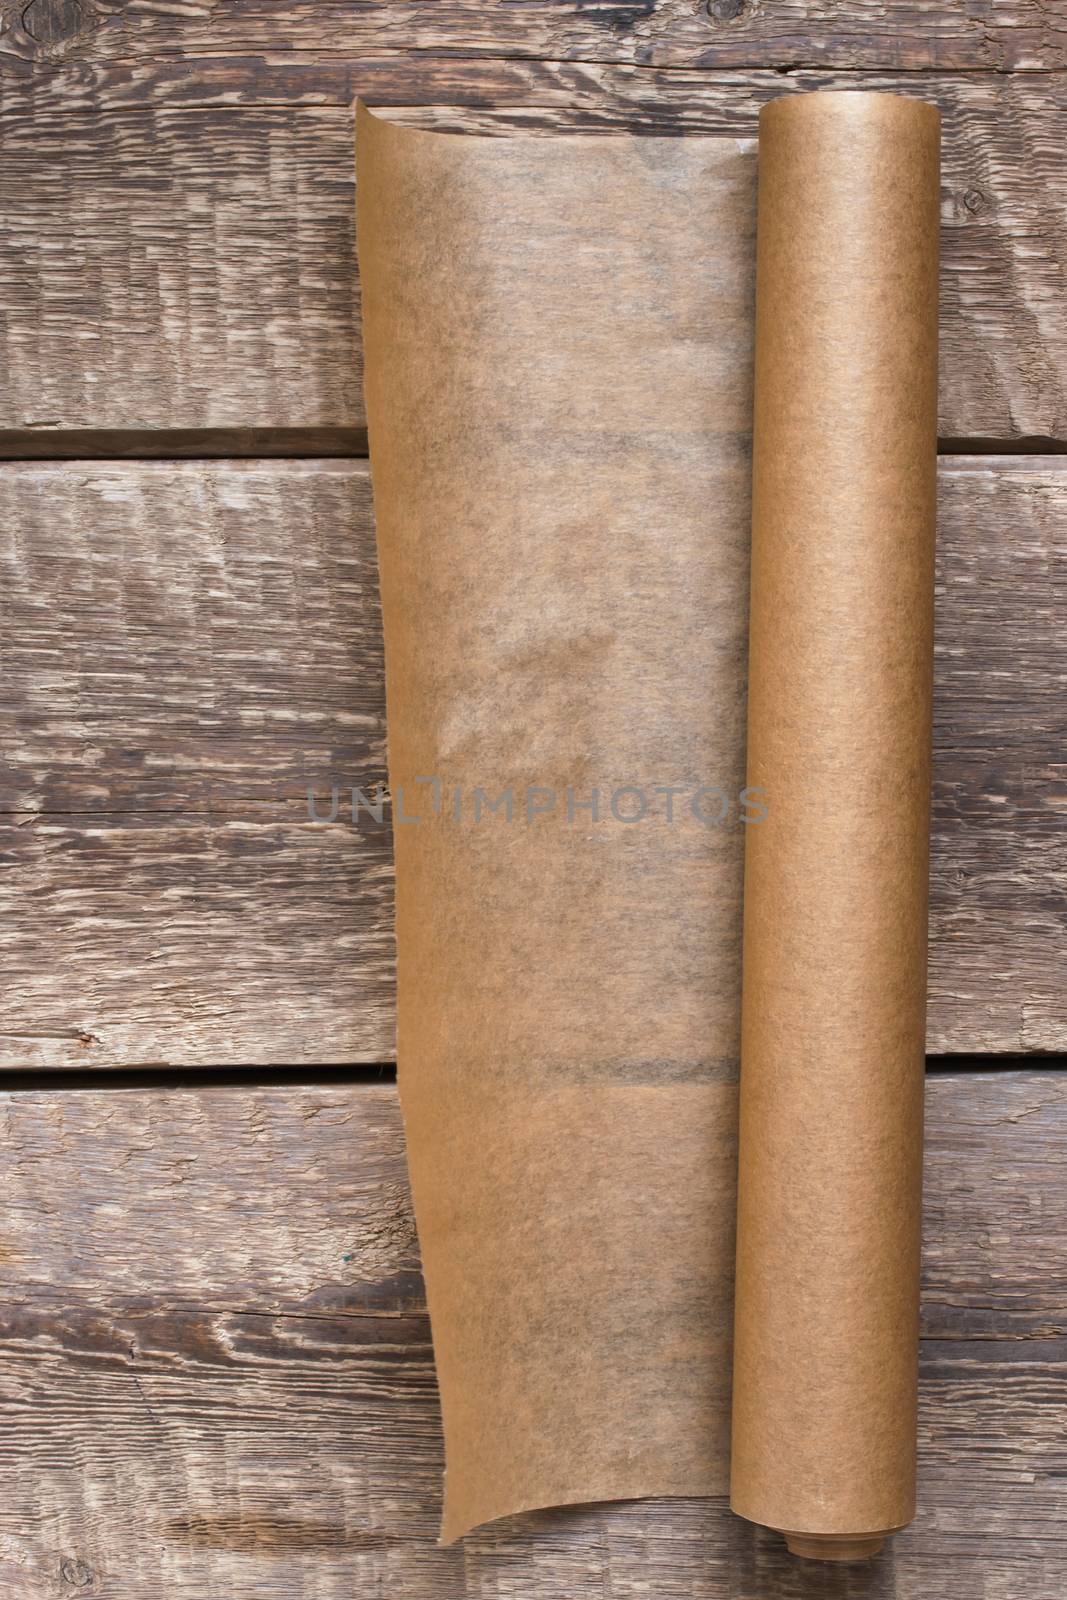 An open roll of paper on the wooden table background by Deniskarpenkov